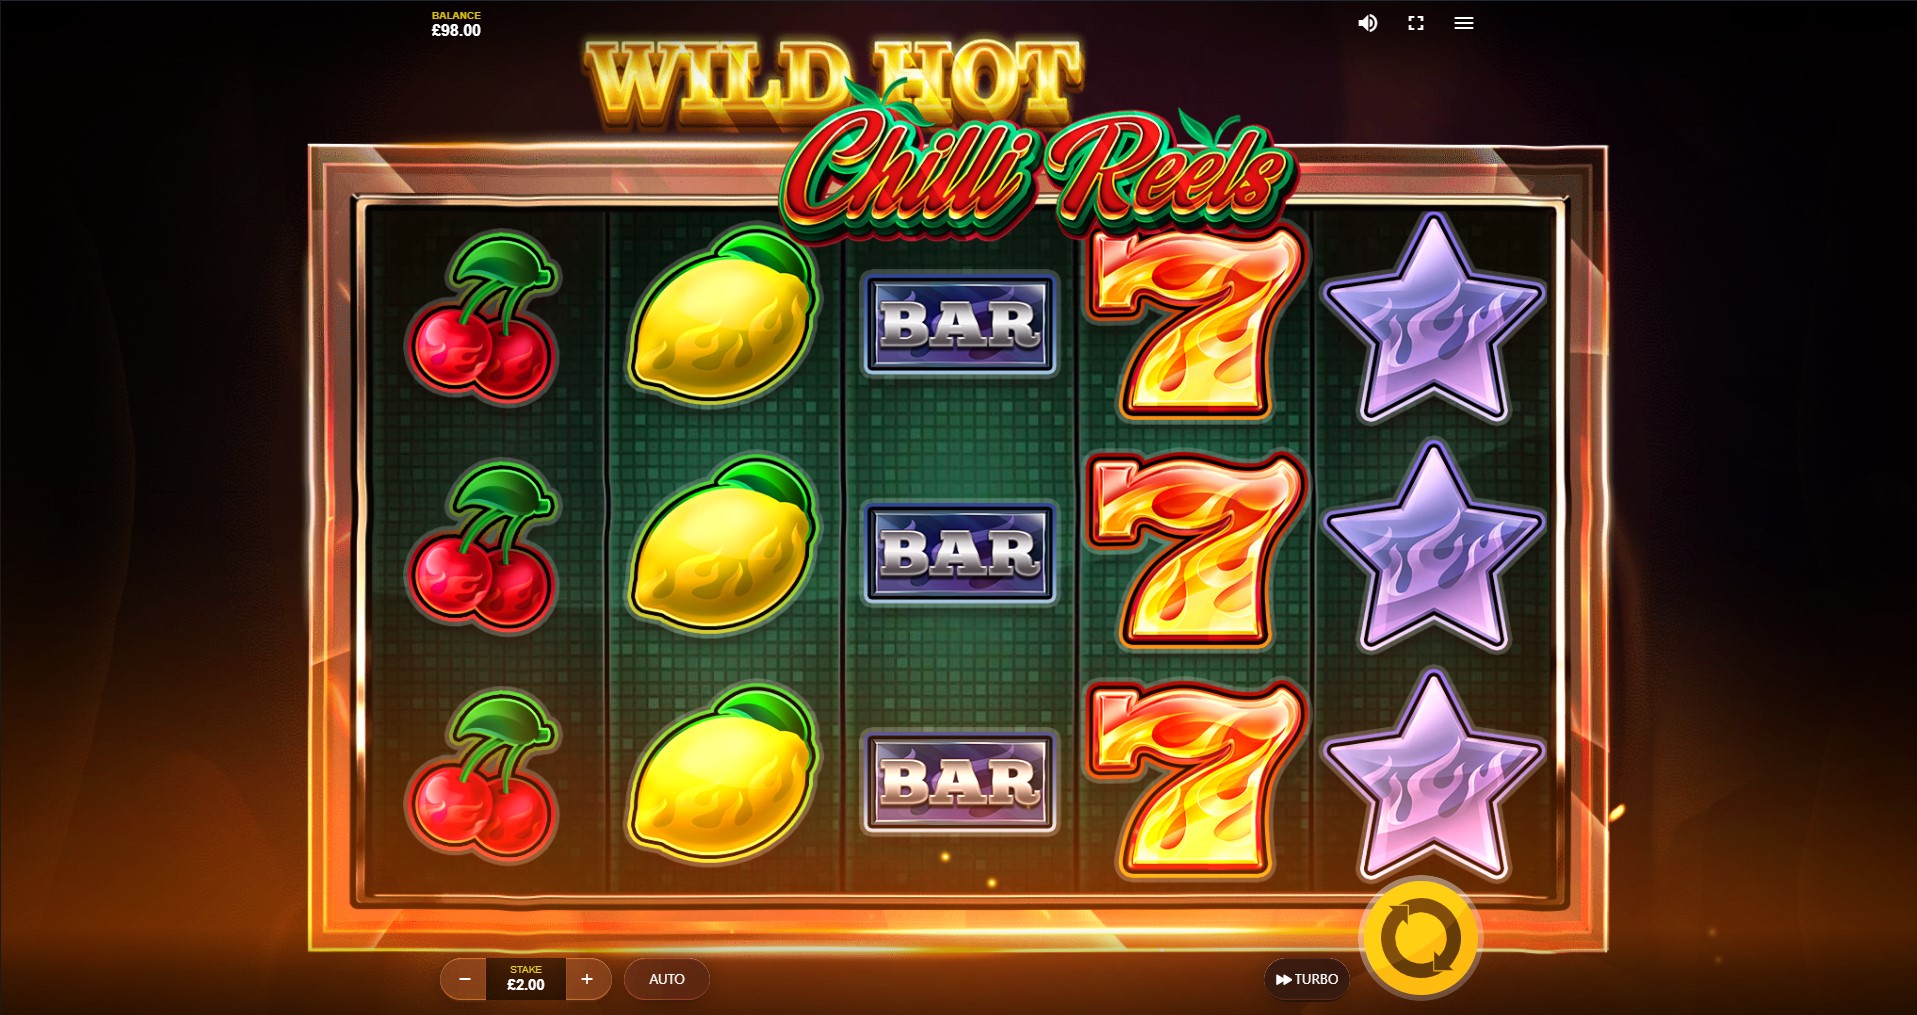 Wild Hot Chilli Reels at the Best Online Casino Sites